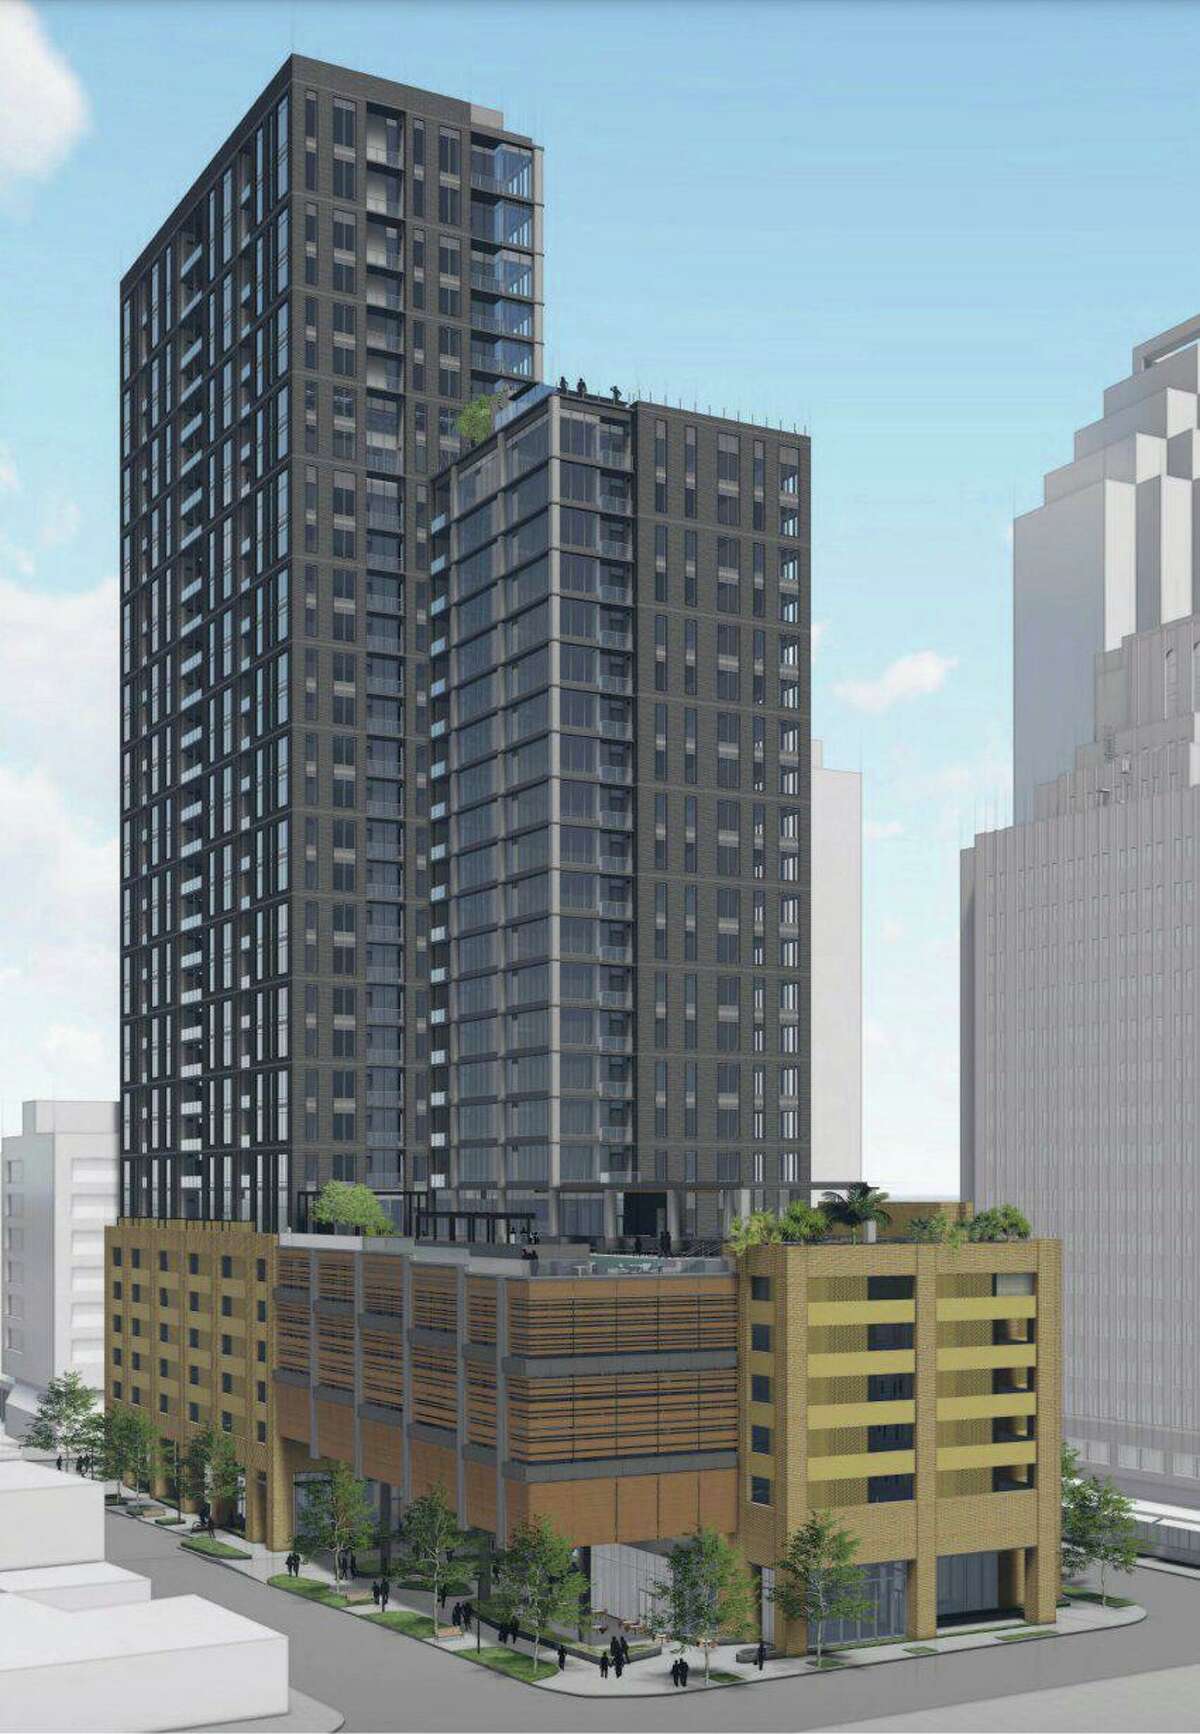 Renderings show the residential tower Weston Urban plans to build at 305 Soledad St. downtown.